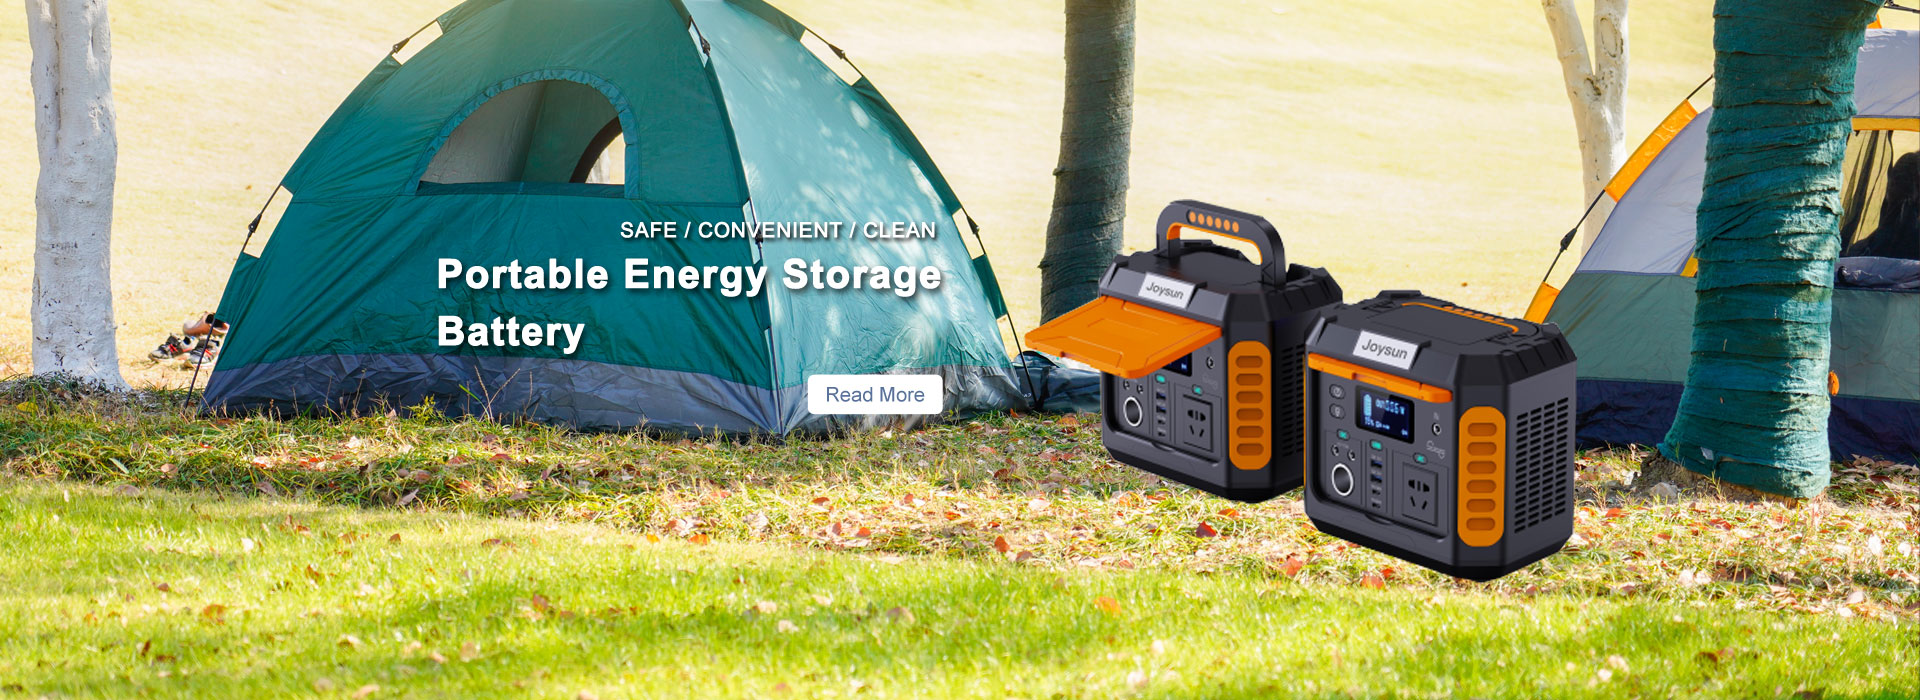 Portable Energy Storage Battery Factory